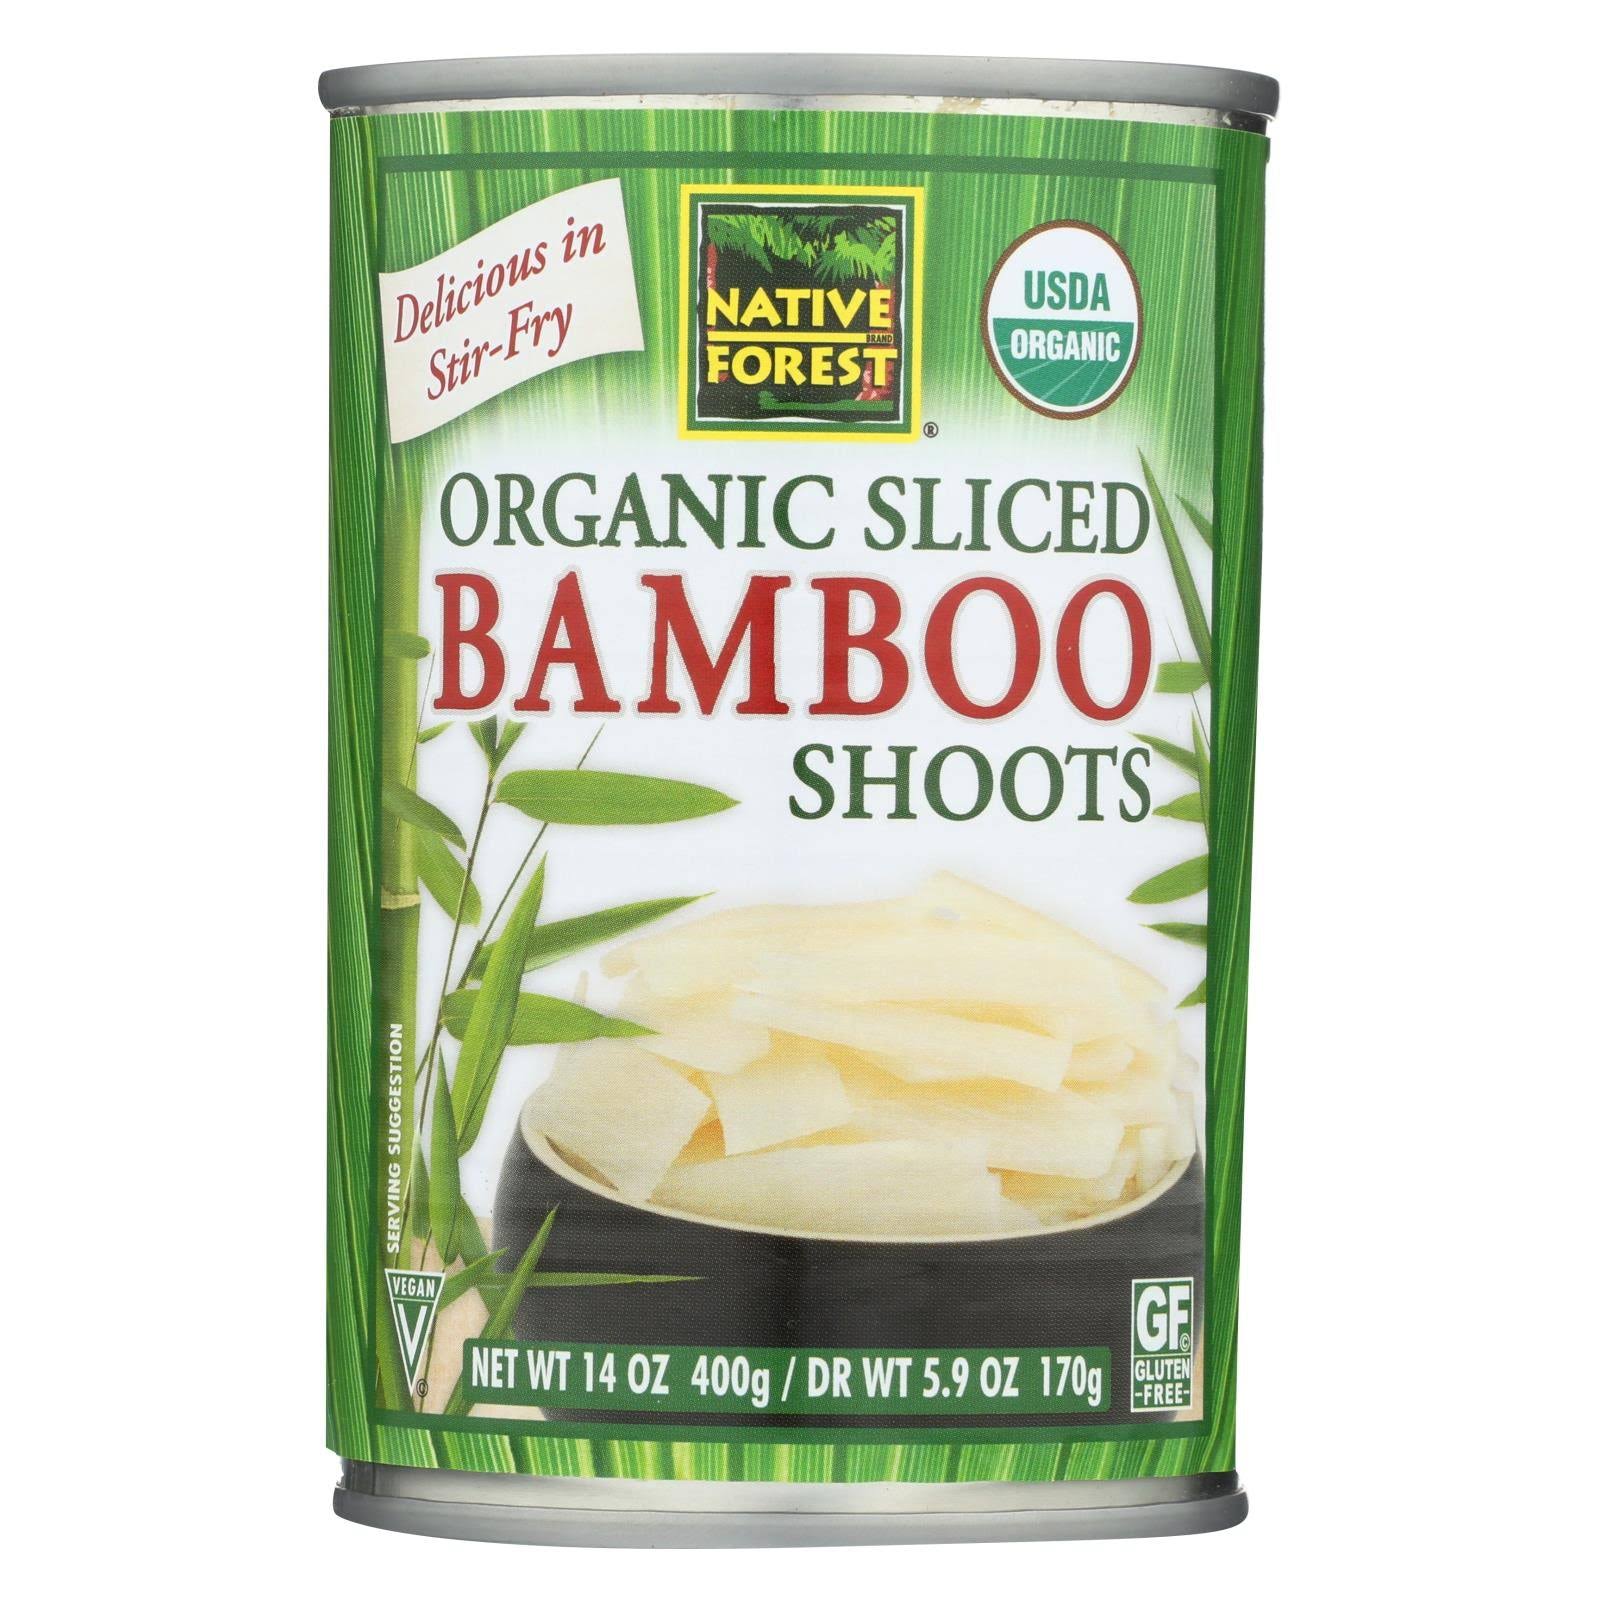 Native Forest Organic Sliced Bamboo Shoots - 14oz